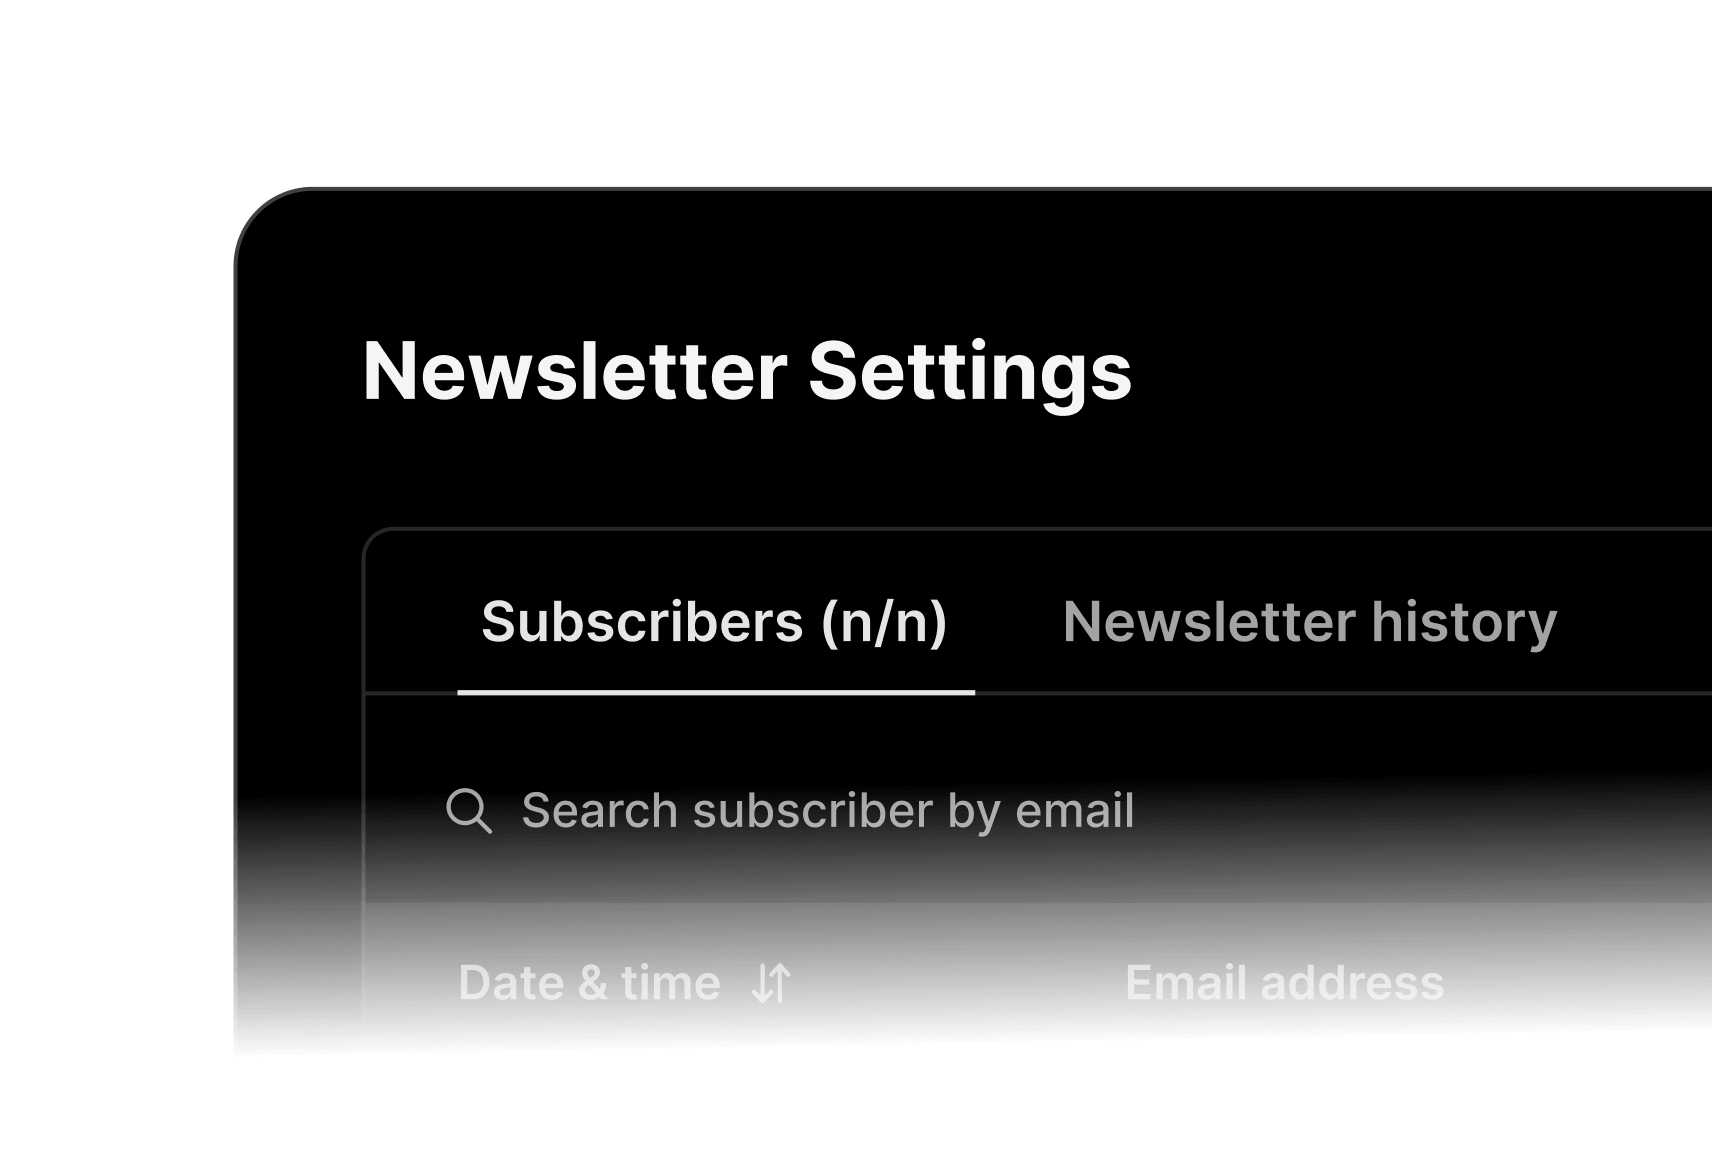 Built-in newsletter functionality.